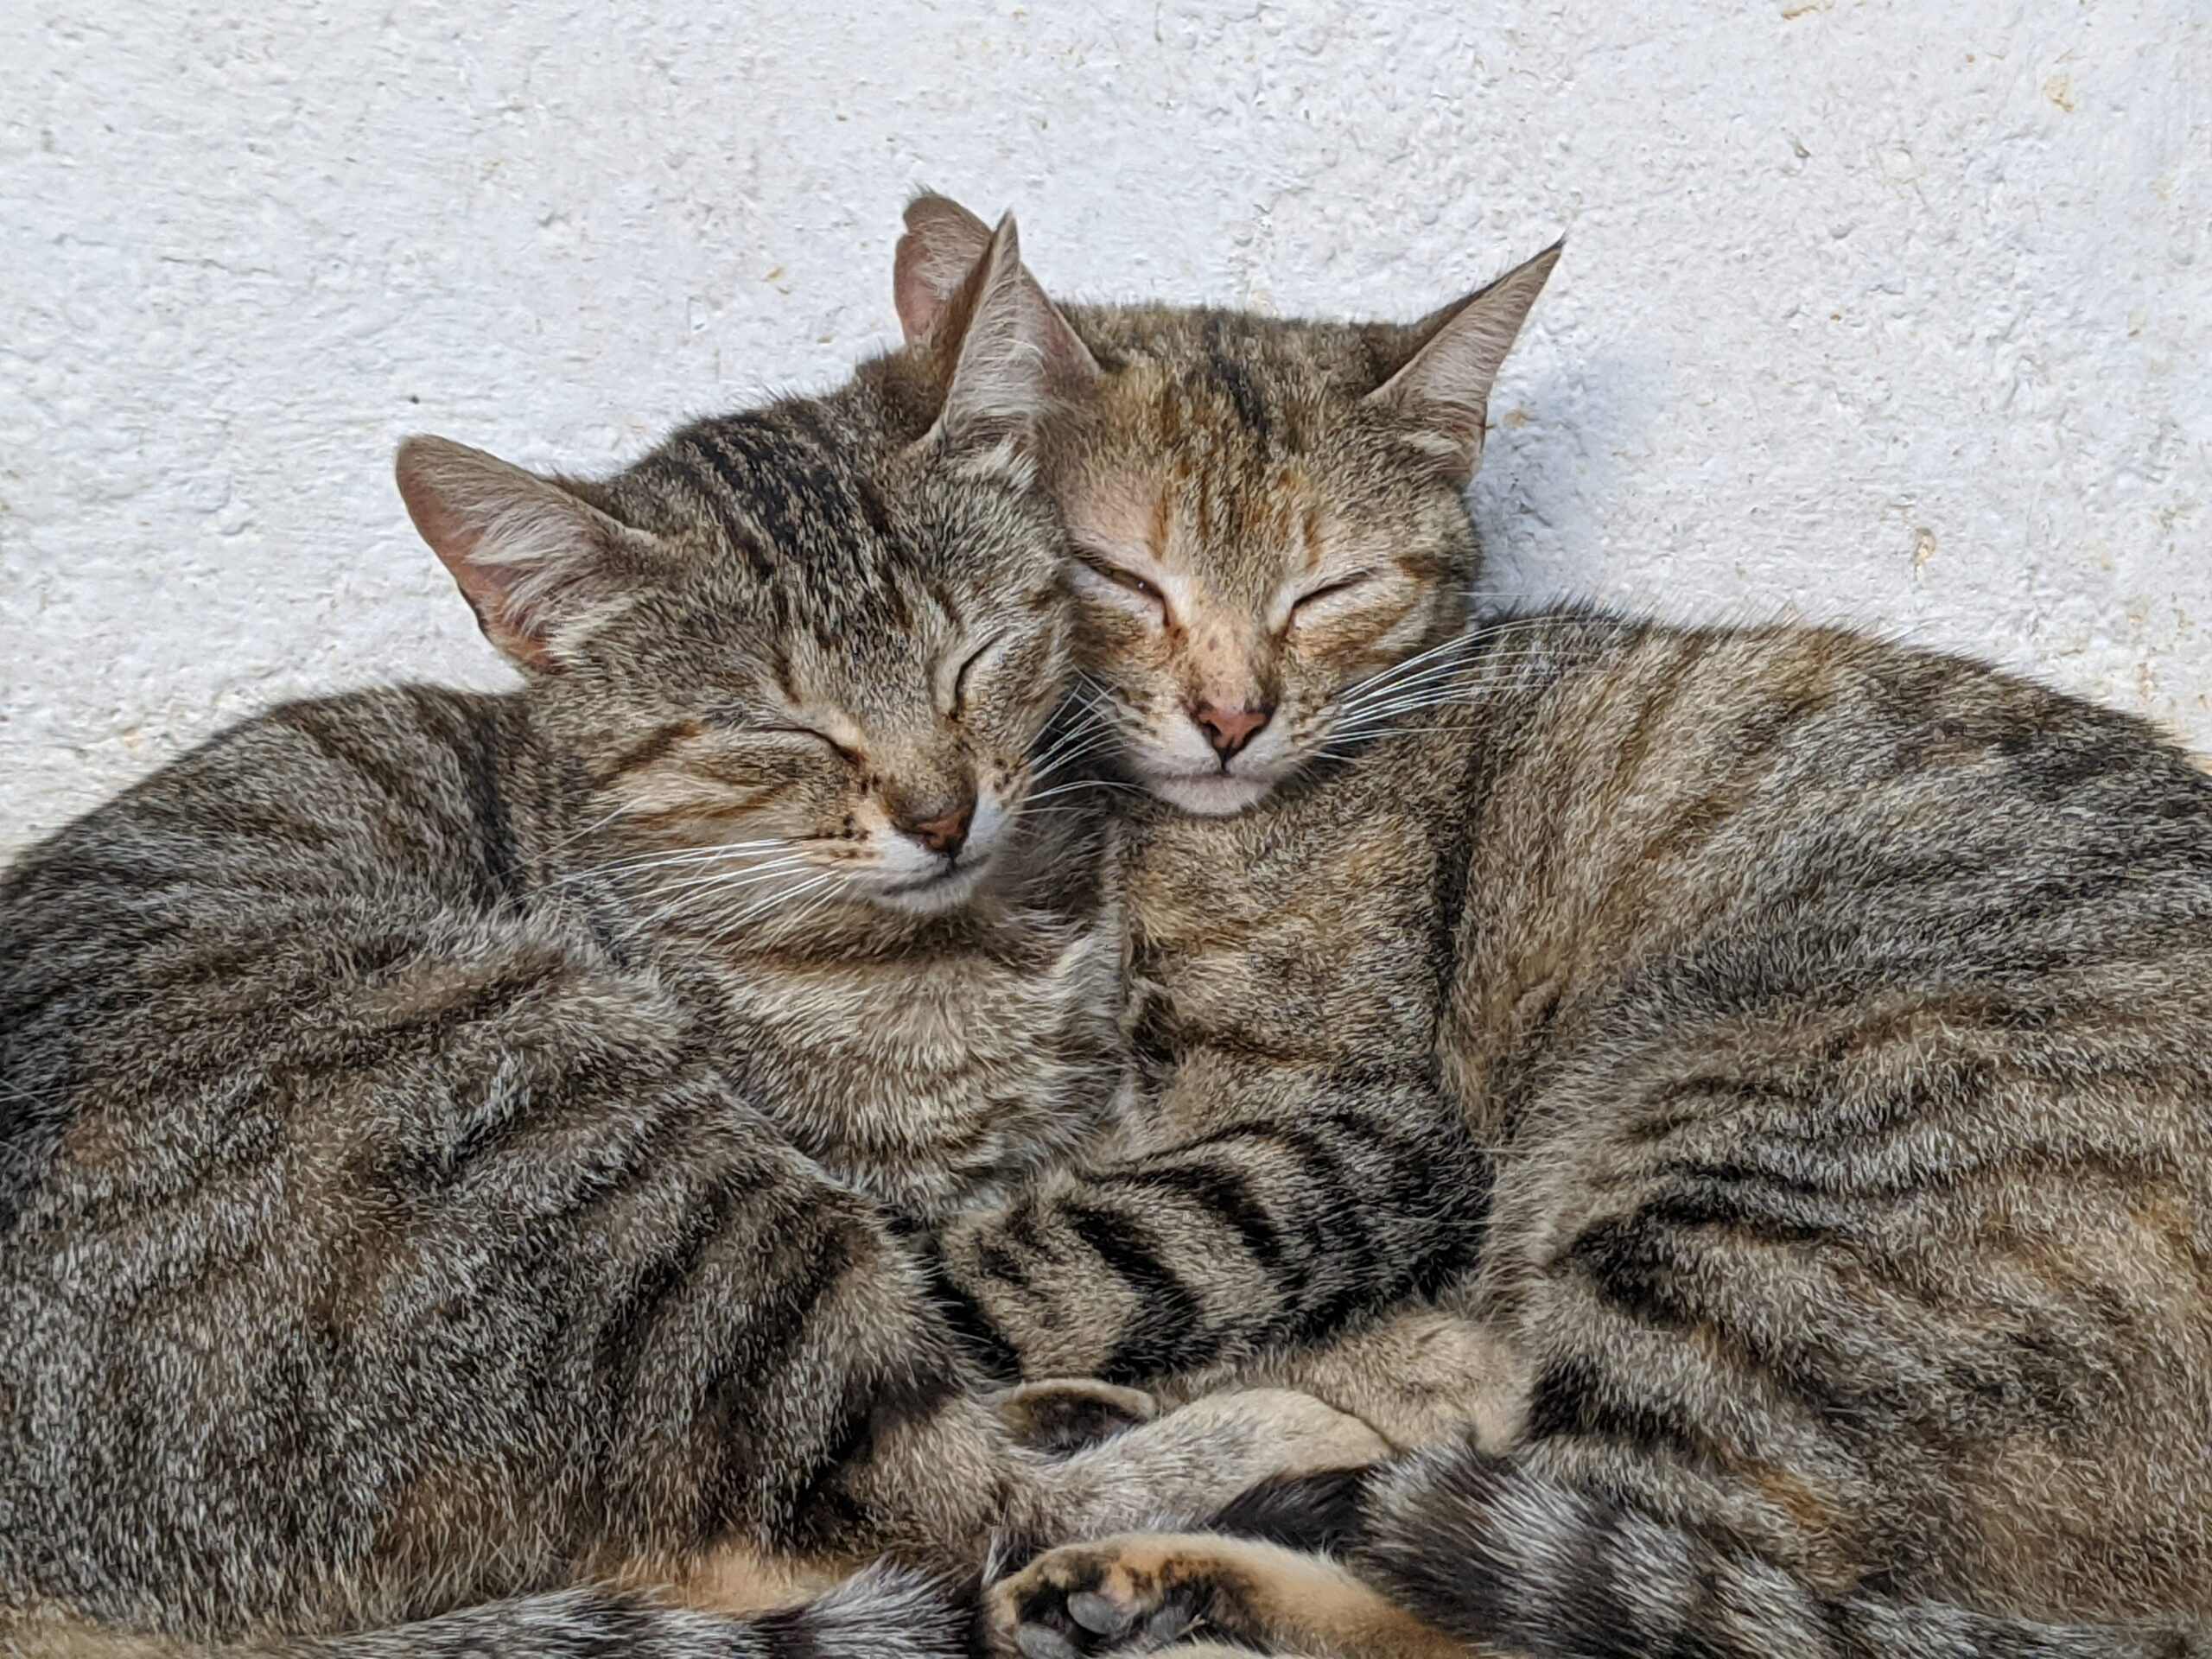 Two cats snuggling.